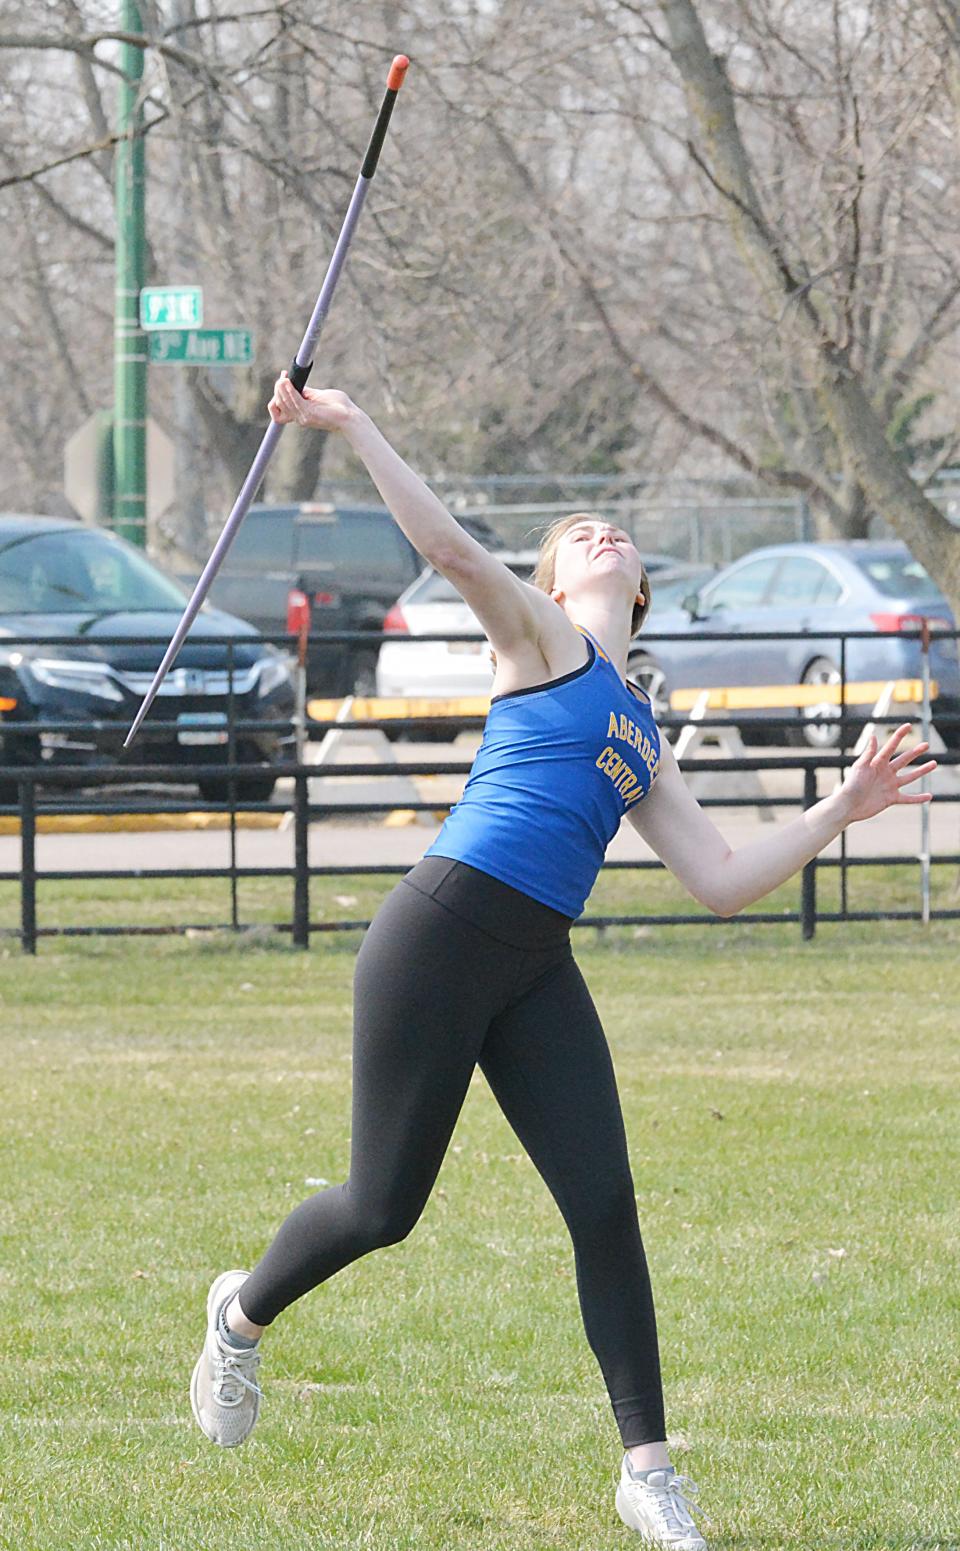 Grace Kuch of Aberdeen Central placed in girls division throwing events in the 2023 Eastern South Dakota Conference track and field meet. She won the discus, took second in the javelin and fifth in the shot put.